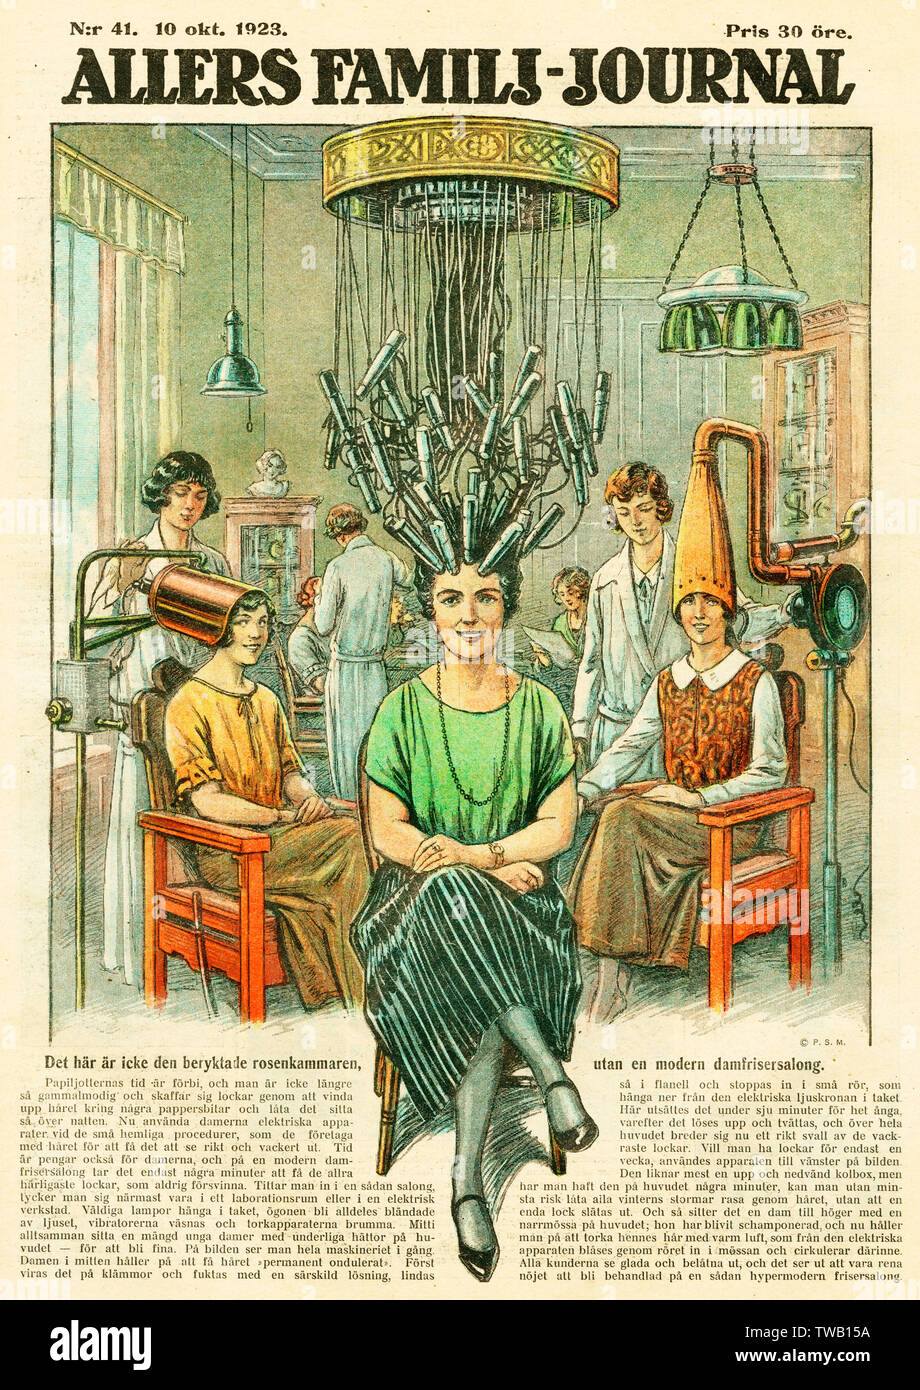 The up-to-date hairdresser employs high technology to groom her clients       Date: 1923 Stock Photo